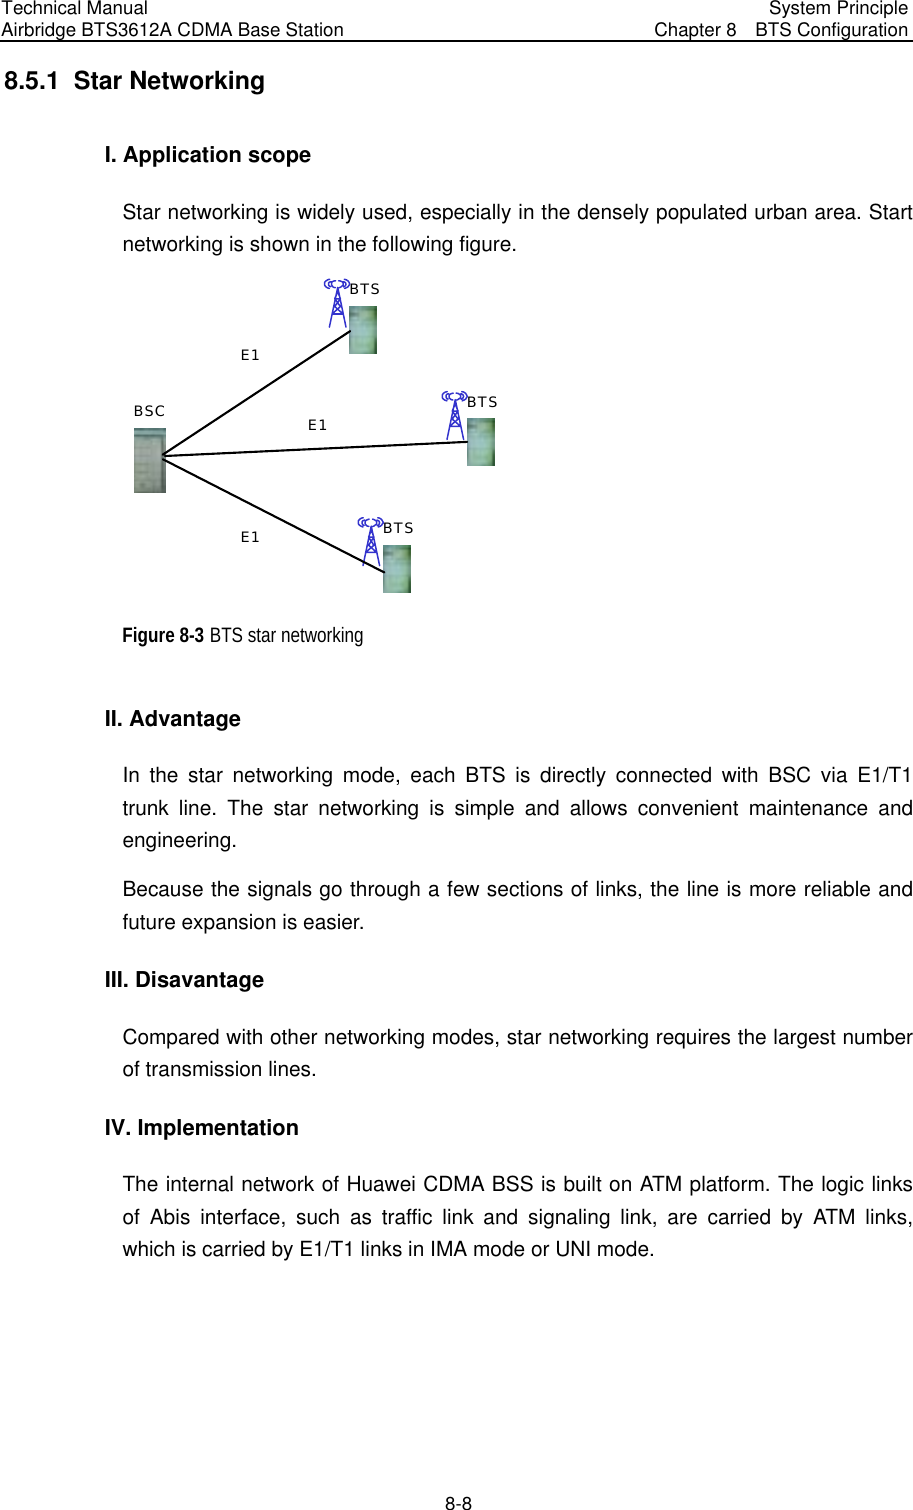 Technical Manual Airbridge BTS3612A CDMA Base Station  System Principle Chapter 8  BTS Configuration  8-8 8.5.1  Star Networking I. Application scope Star networking is widely used, especially in the densely populated urban area. Start networking is shown in the following figure. BSCBTSBTSBTSE1E1E1 Figure 8-3 BTS star networking II. Advantage In the star networking mode, each BTS is directly connected with BSC via E1/T1 trunk line. The star networking is simple and allows convenient maintenance and engineering. Because the signals go through a few sections of links, the line is more reliable and future expansion is easier. III. Disavantage Compared with other networking modes, star networking requires the largest number of transmission lines. IV. Implementation The internal network of Huawei CDMA BSS is built on ATM platform. The logic links of Abis interface, such as traffic link and signaling link, are carried by ATM links, which is carried by E1/T1 links in IMA mode or UNI mode. 